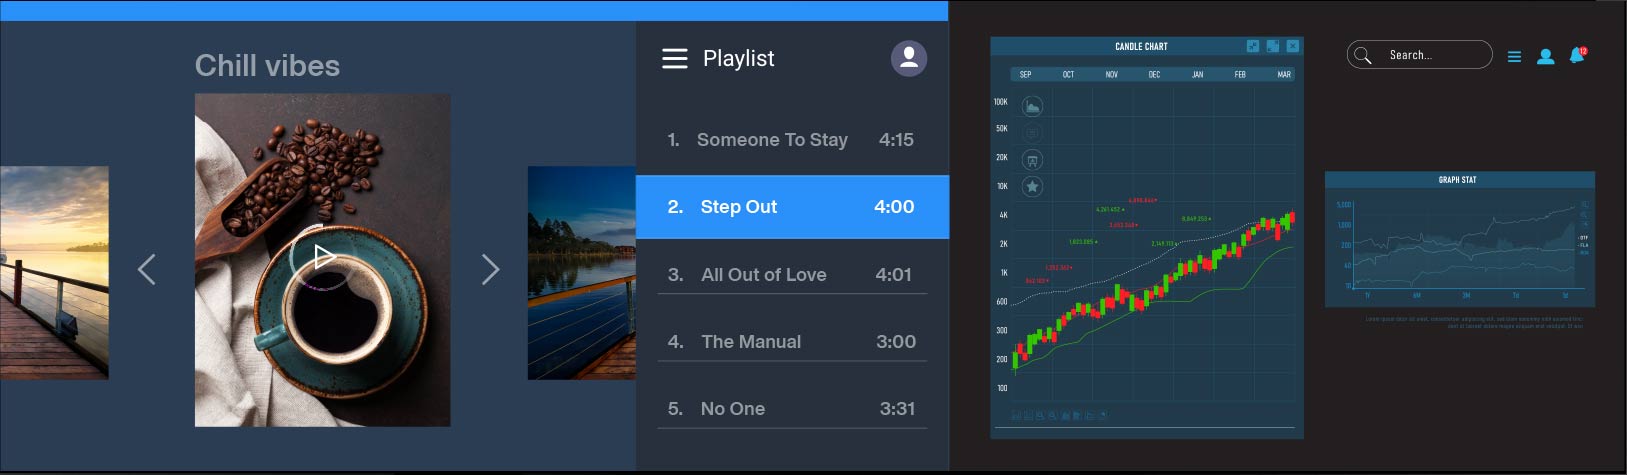 the music player software interface